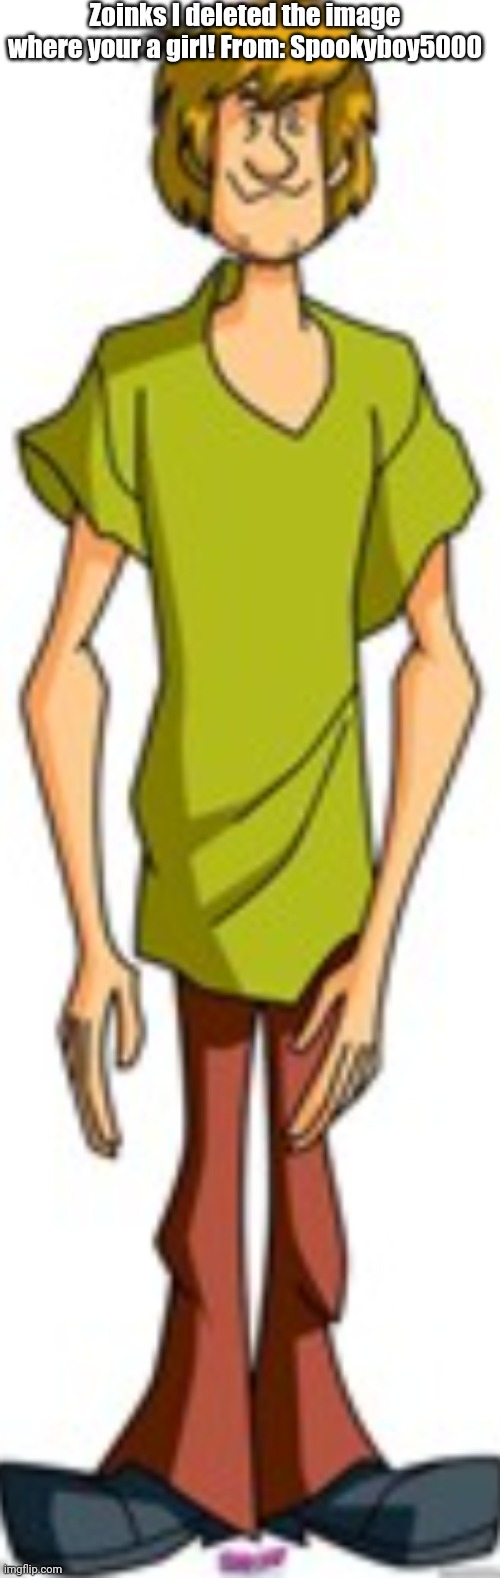 Shaggy Standing | Zoinks I deleted the image where your a girl! From: Spookyboy5000 | image tagged in shaggy standing | made w/ Imgflip meme maker